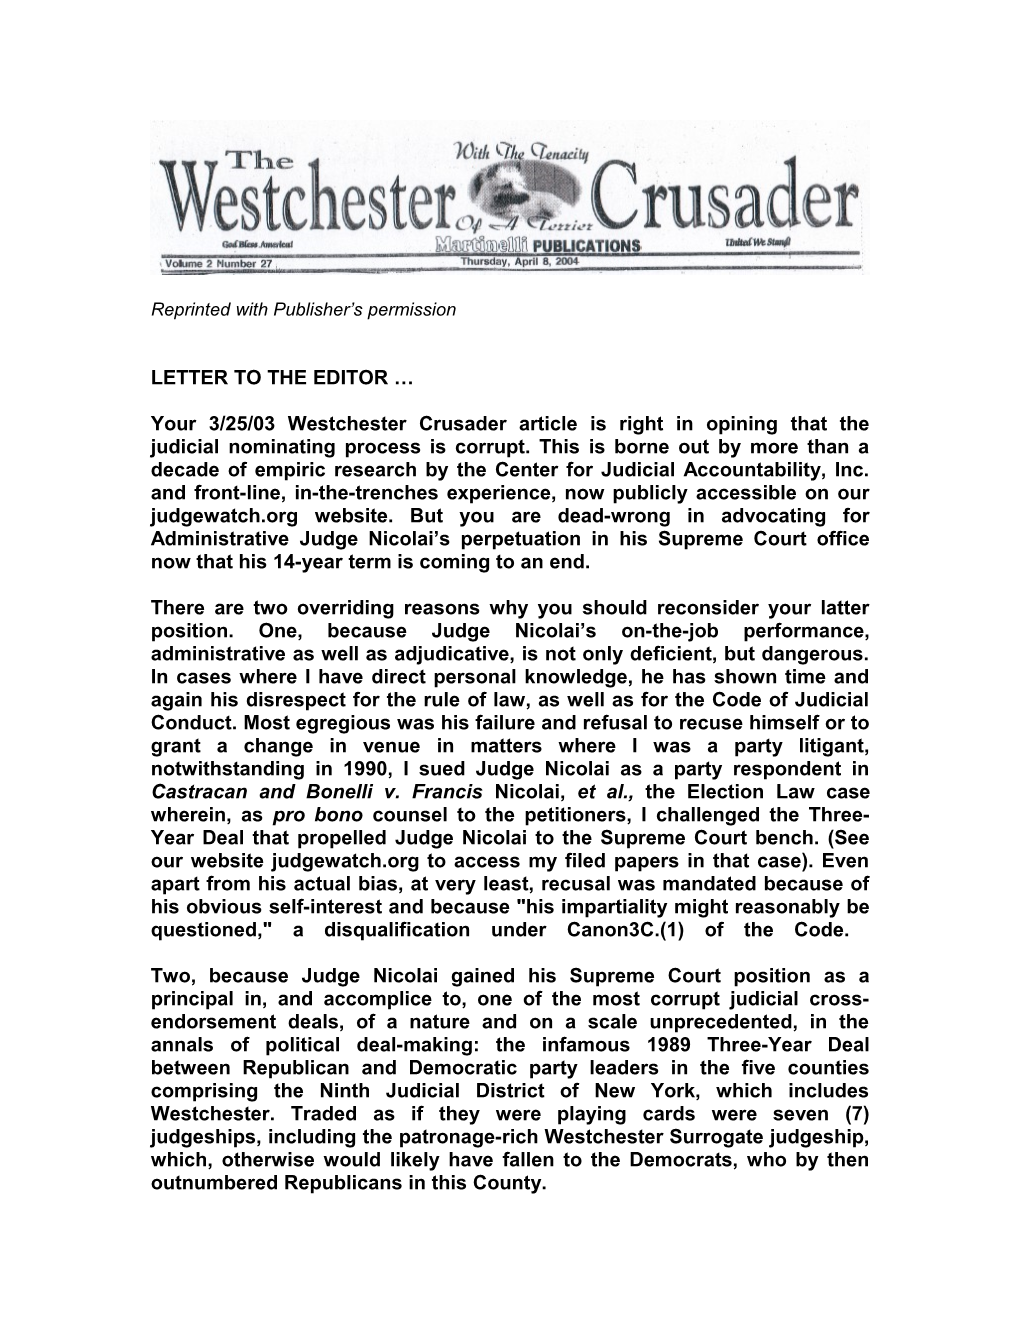 Your Article in the 3/25/03 March 25, 2004 Westchester Crusader Is Right in Saying That